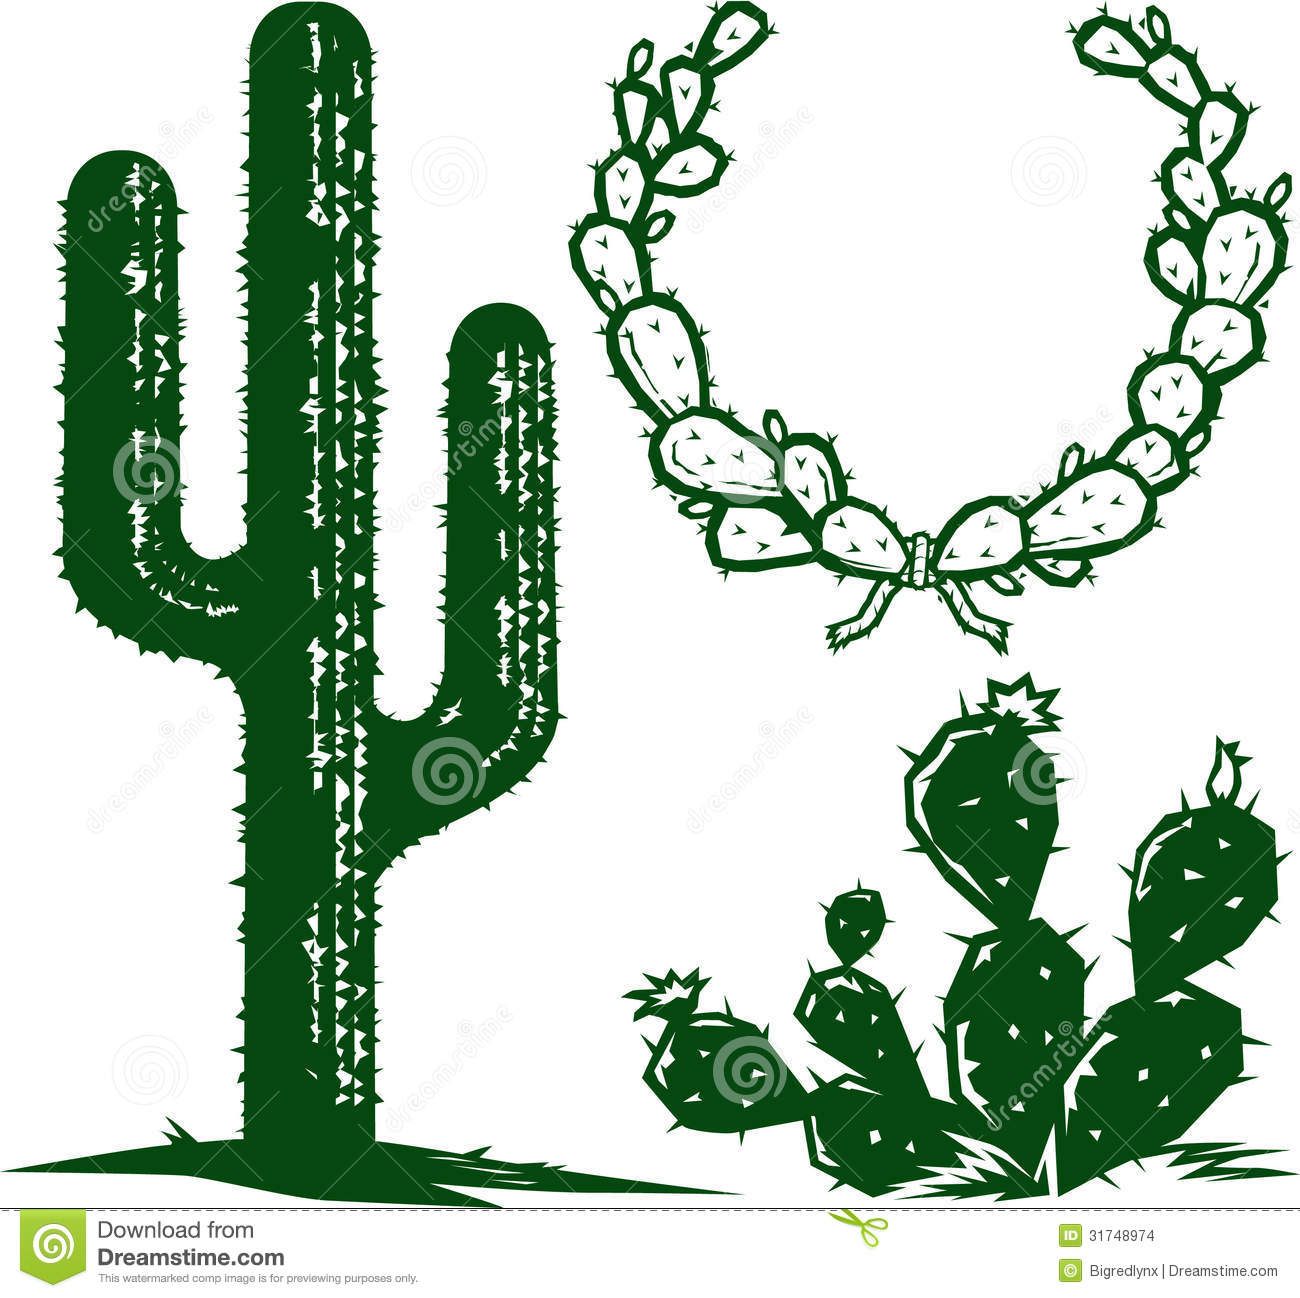 Cactus clipart 20 free Cliparts | Download images on ...